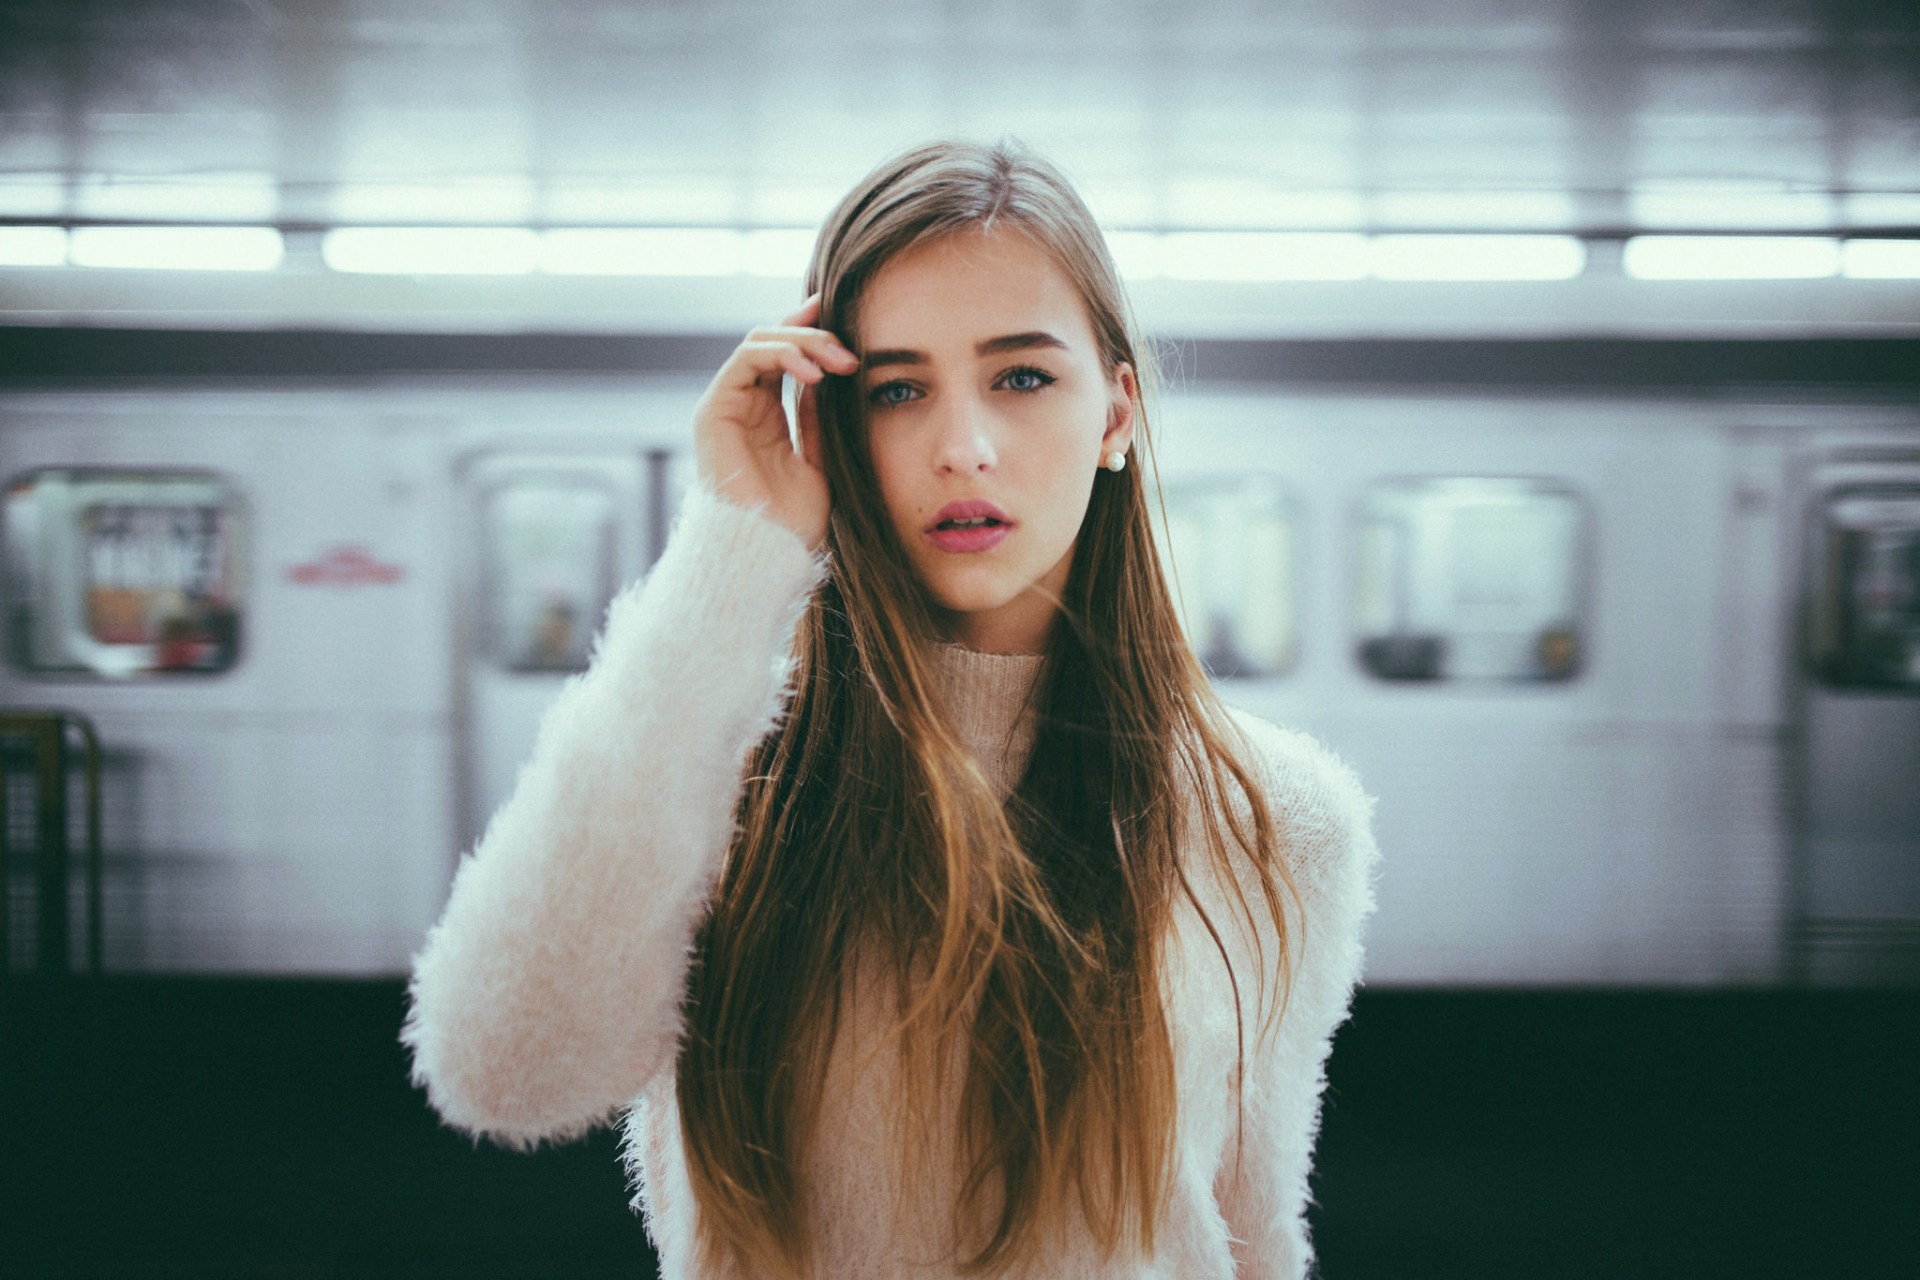 25 Signs You May Be Clairsentient — Someone Who Feels Things Very Deeply